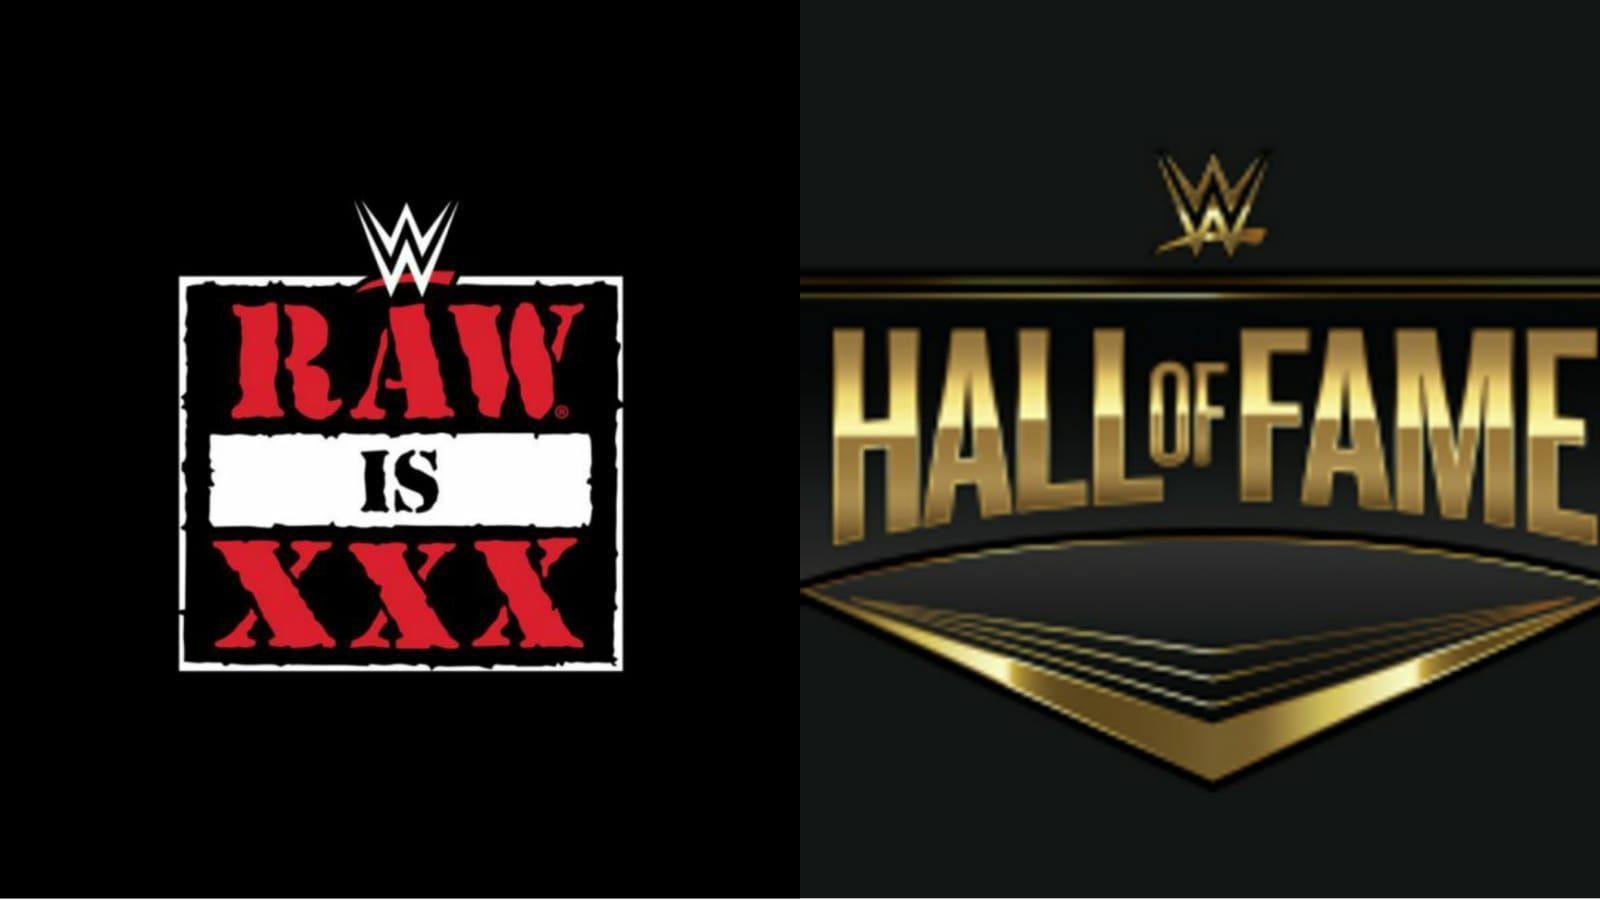 RAW XXX featured several WWE legends!